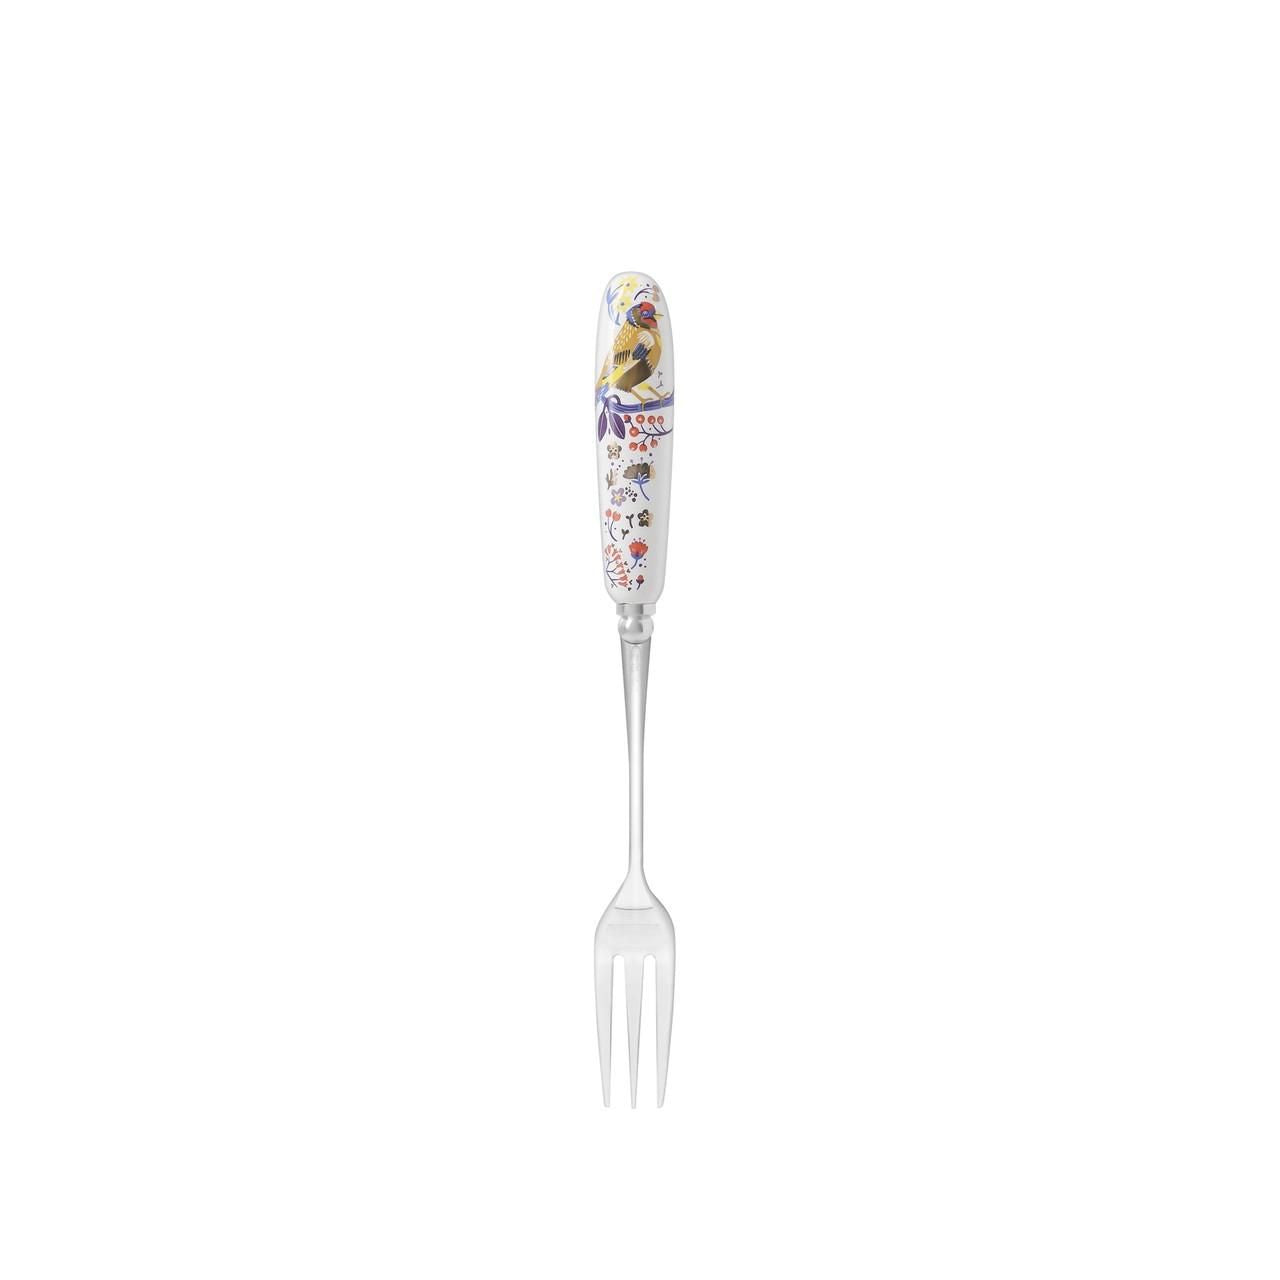 Tipperary Crystal Birdy Dessert Forks - New 2022  New to our collection, these birdy desert forks come beautifully illustrated and presented in a rigid Tipperary Crystal gift box. Makes a wonderful gift to be enjoyed.  The Birdy Collection is a series of 6 exclusively commissioned illustrations inspired by native Irish birds; Bullfinch, Goldfinch, Blue tit, Greenfinch, Kingfisher and Robin.